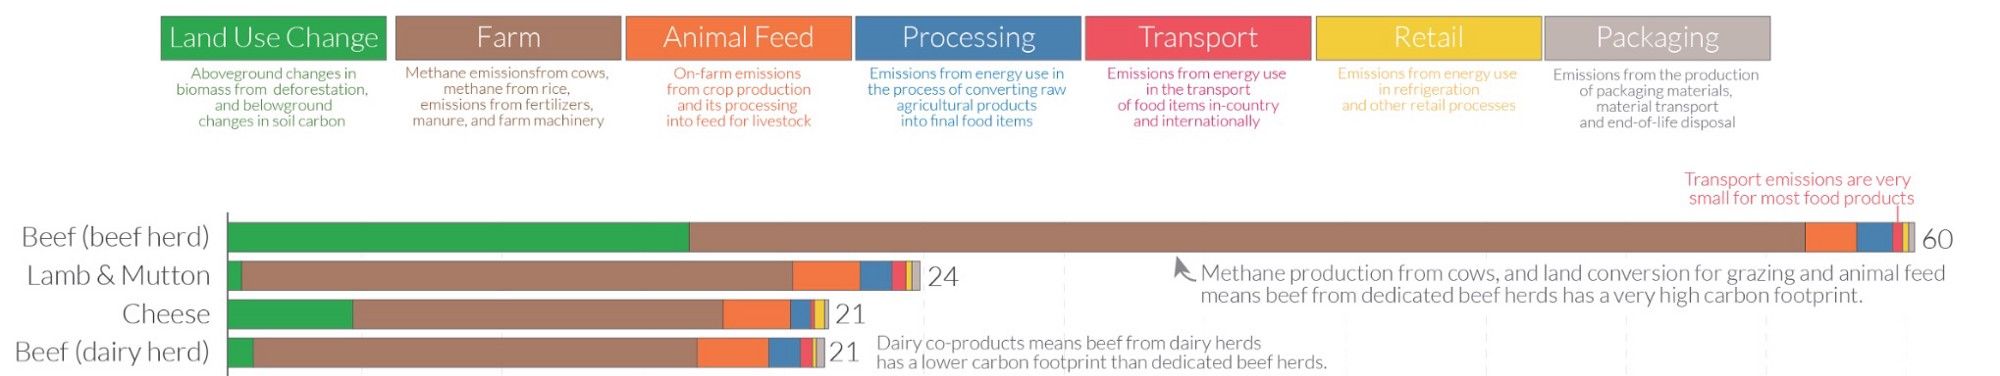 What’s The Carbon Cost Of Food?